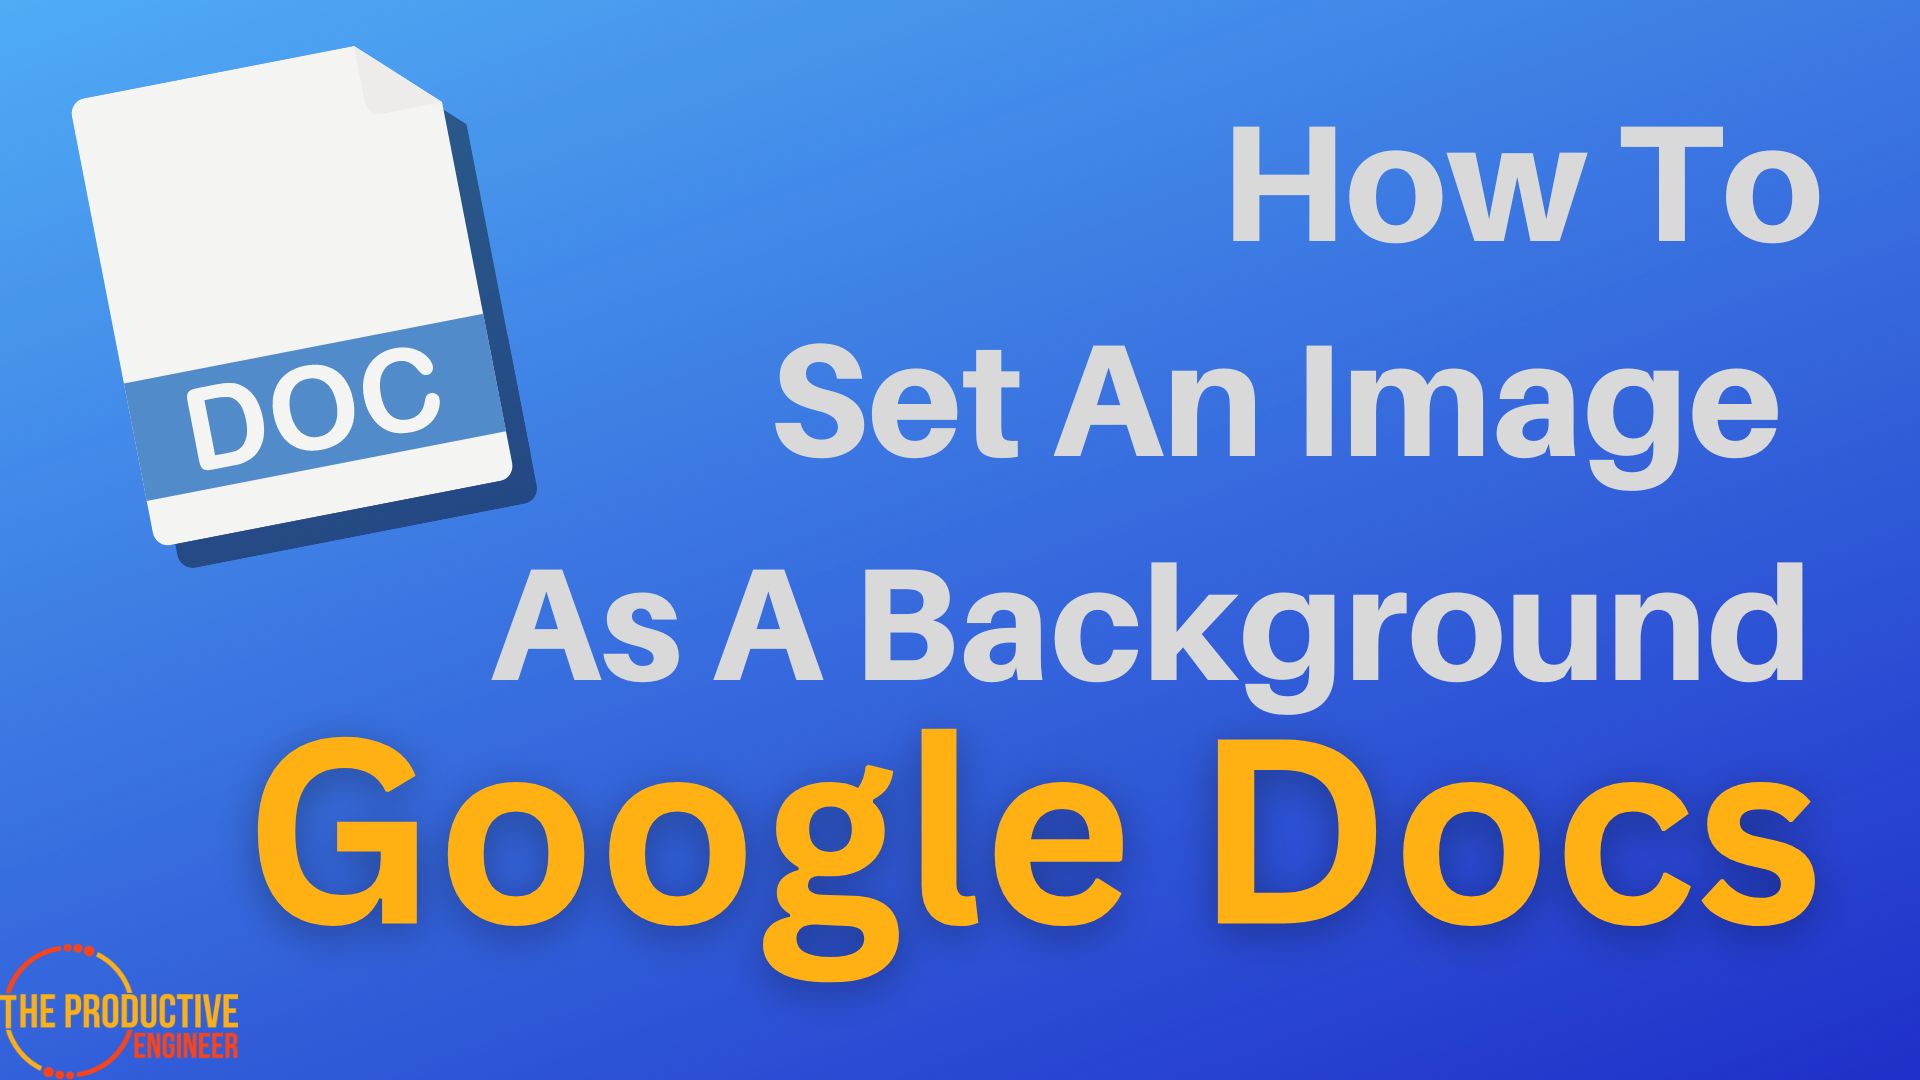 How To Set An Image As A Background In Google Docs